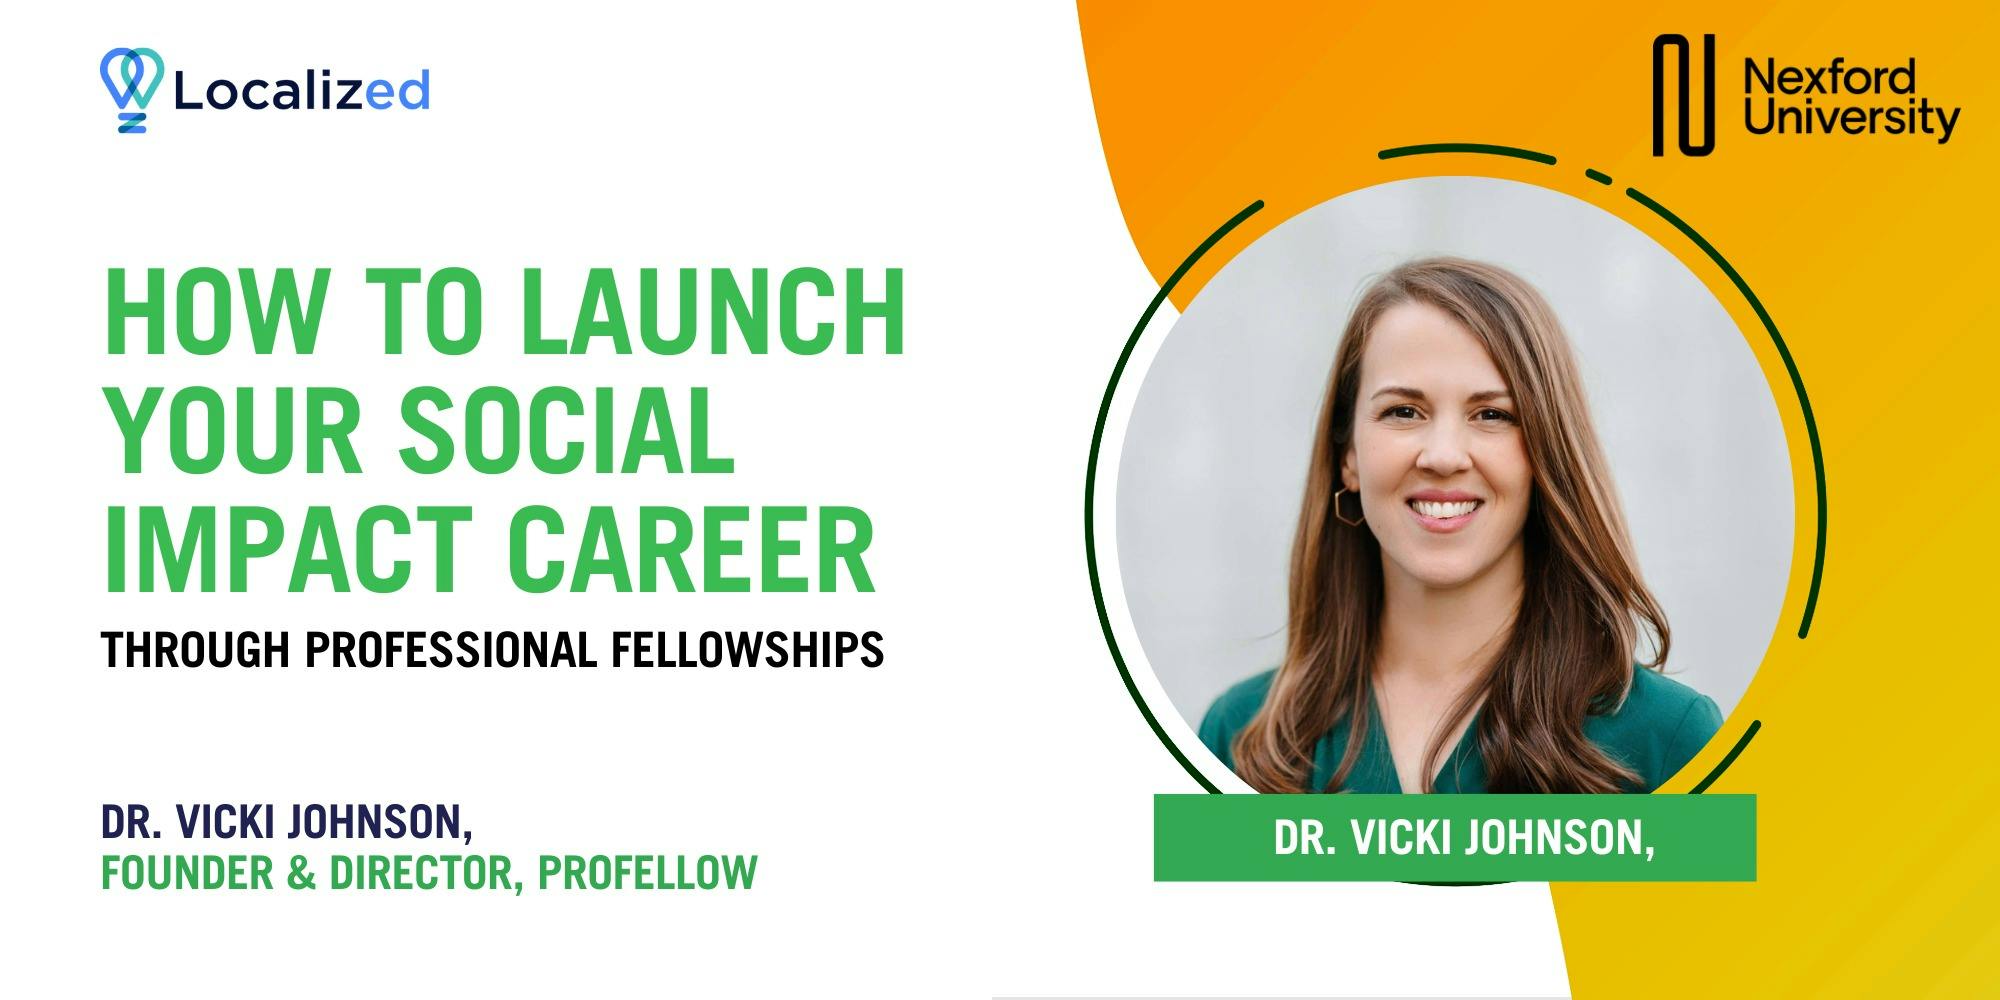 How to Launch Your Social Impact Career Through Professional Fellowships